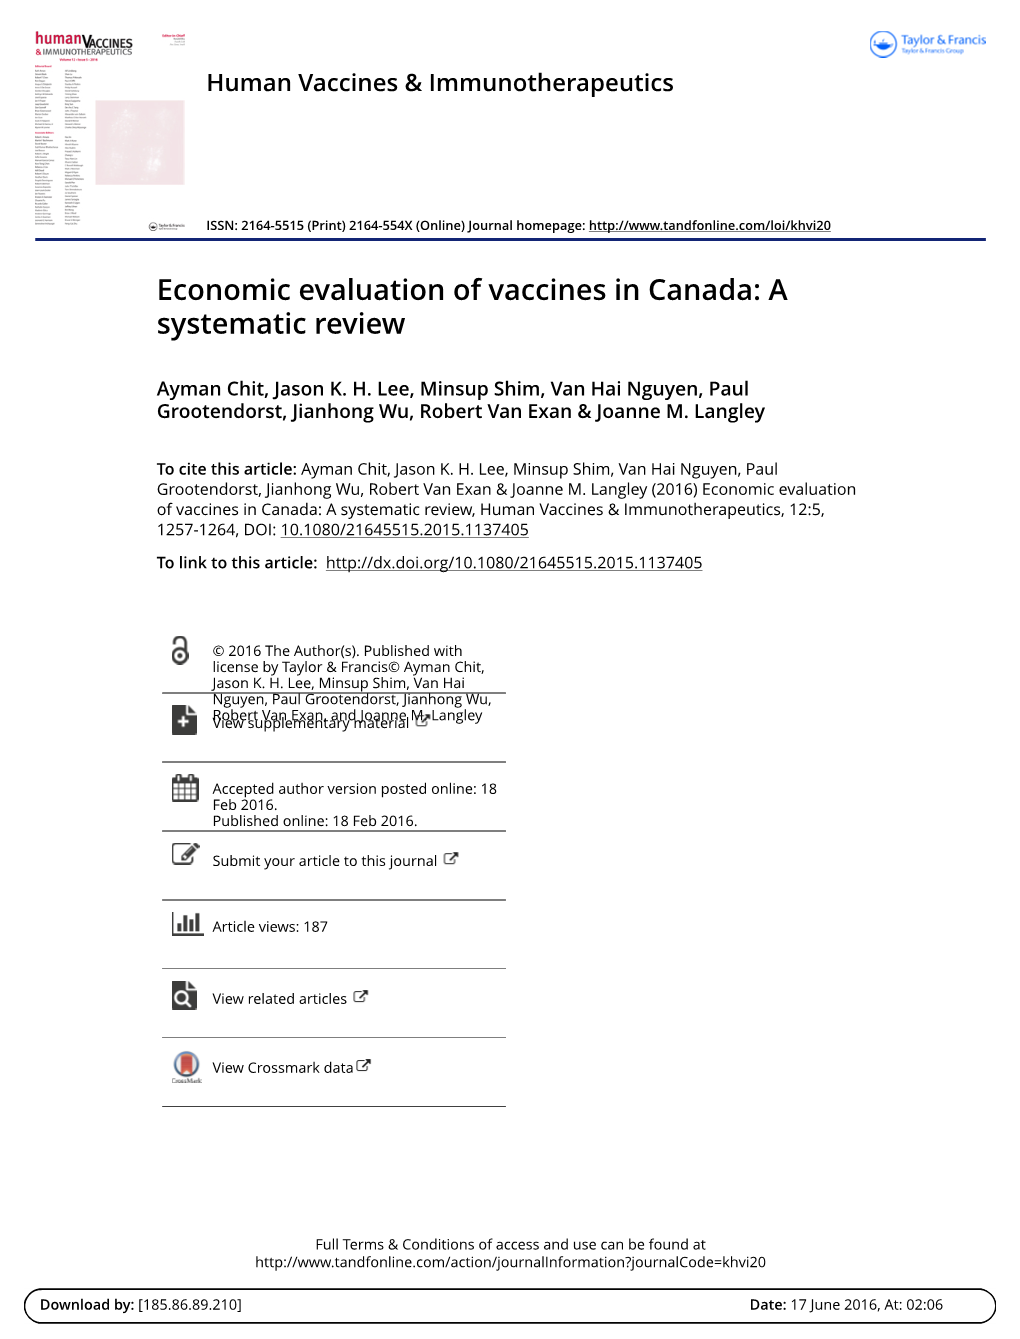 Economic Evaluation of Vaccines in Canada: a Systematic Review